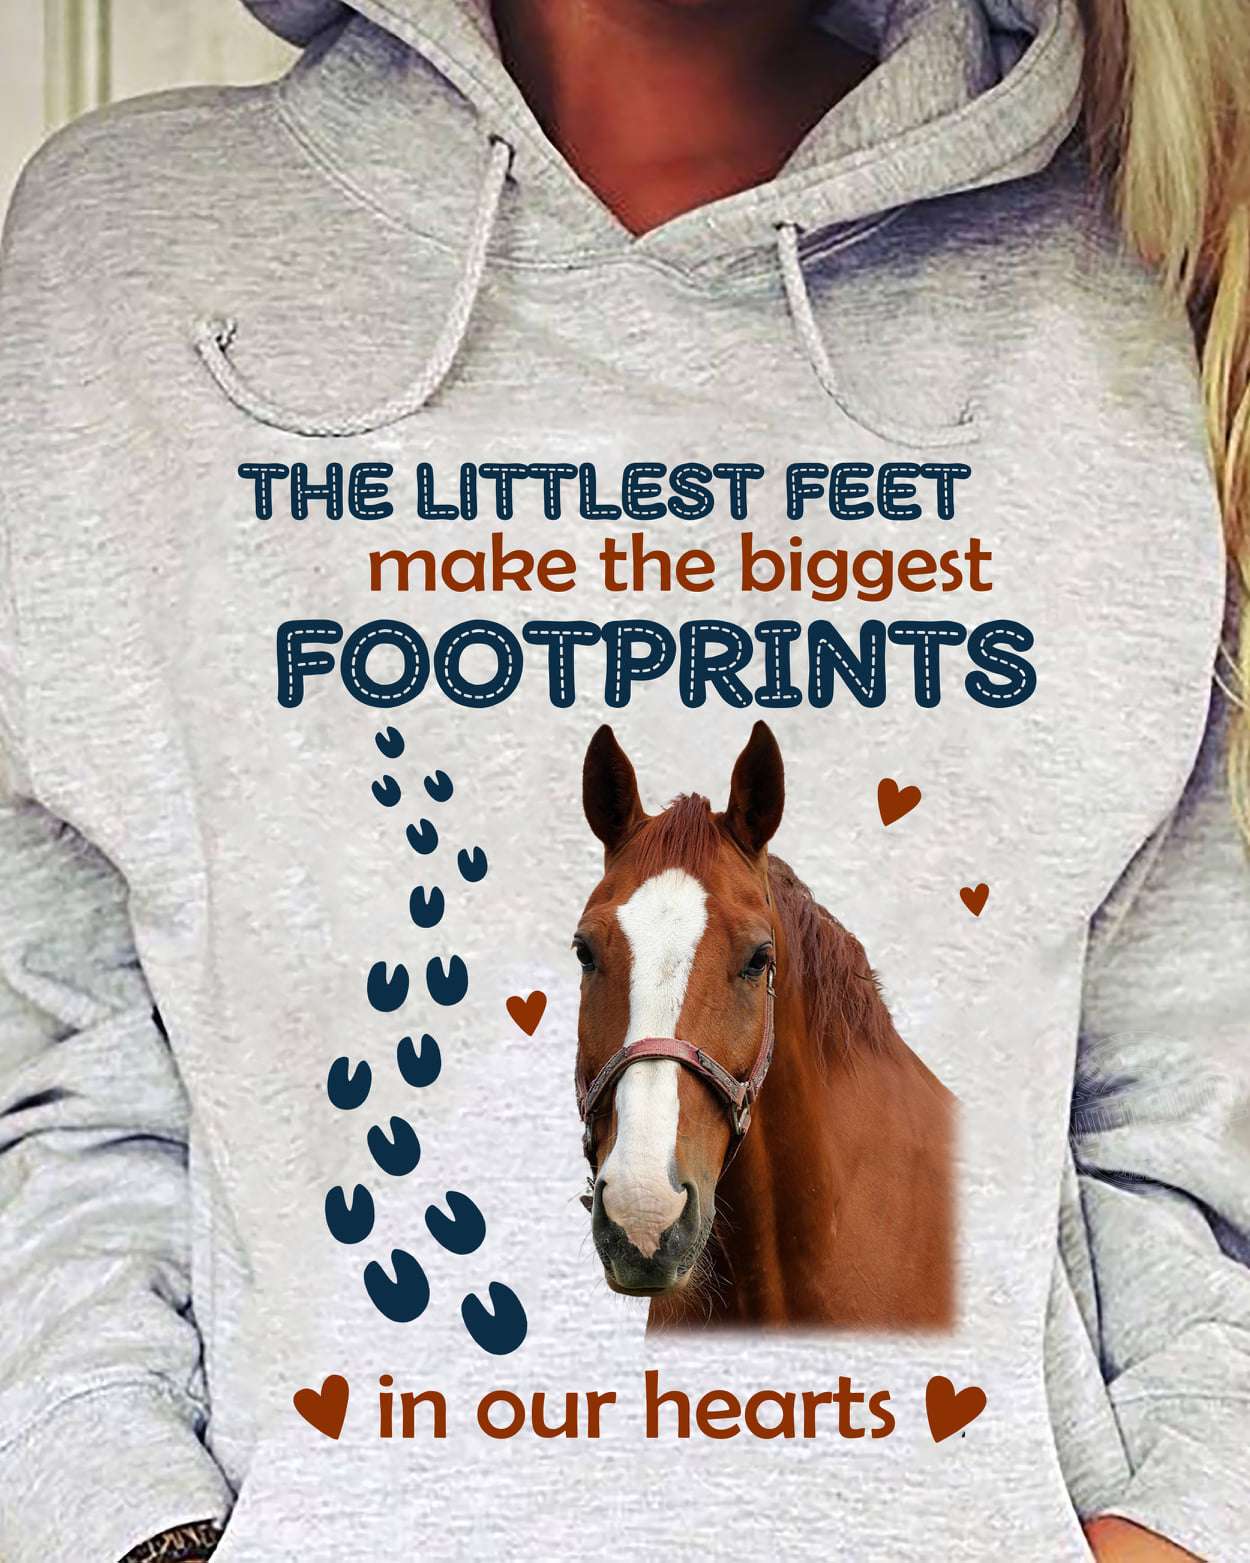 Love Horse - The littlest feet make the biggest footprints in our hearts